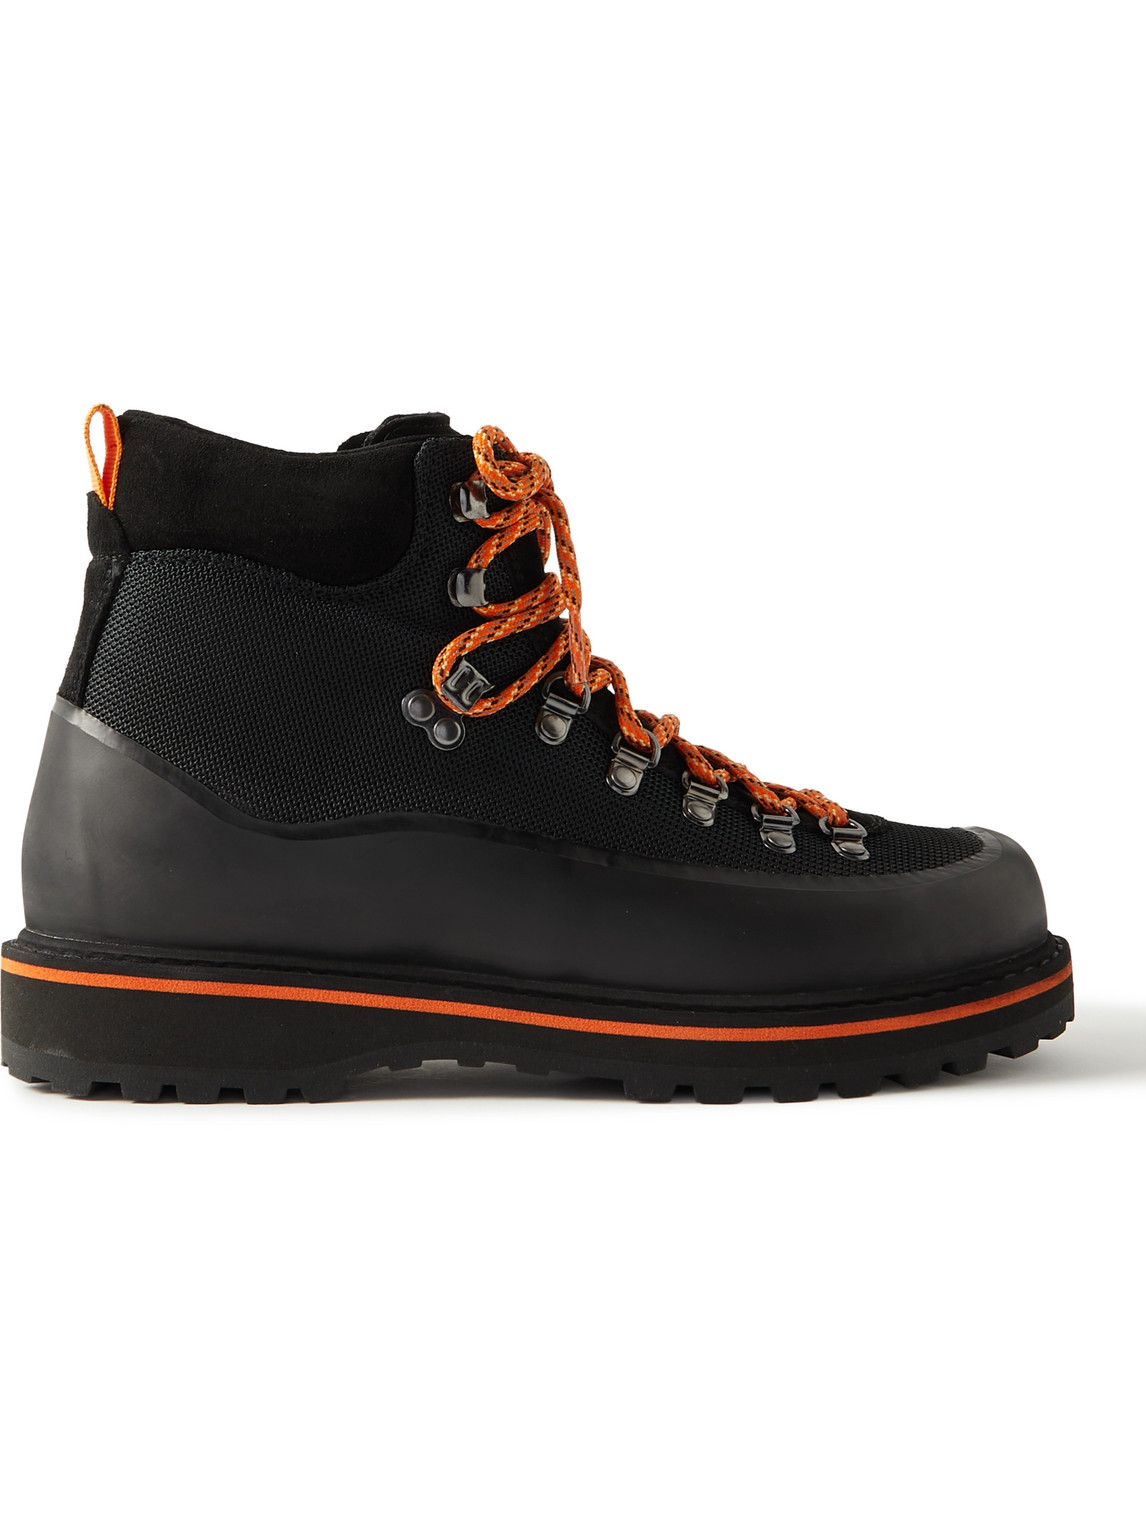 Diemme Roccia Vet Sport Leather-Trimmed Mesh and Rubber Hiking Boots